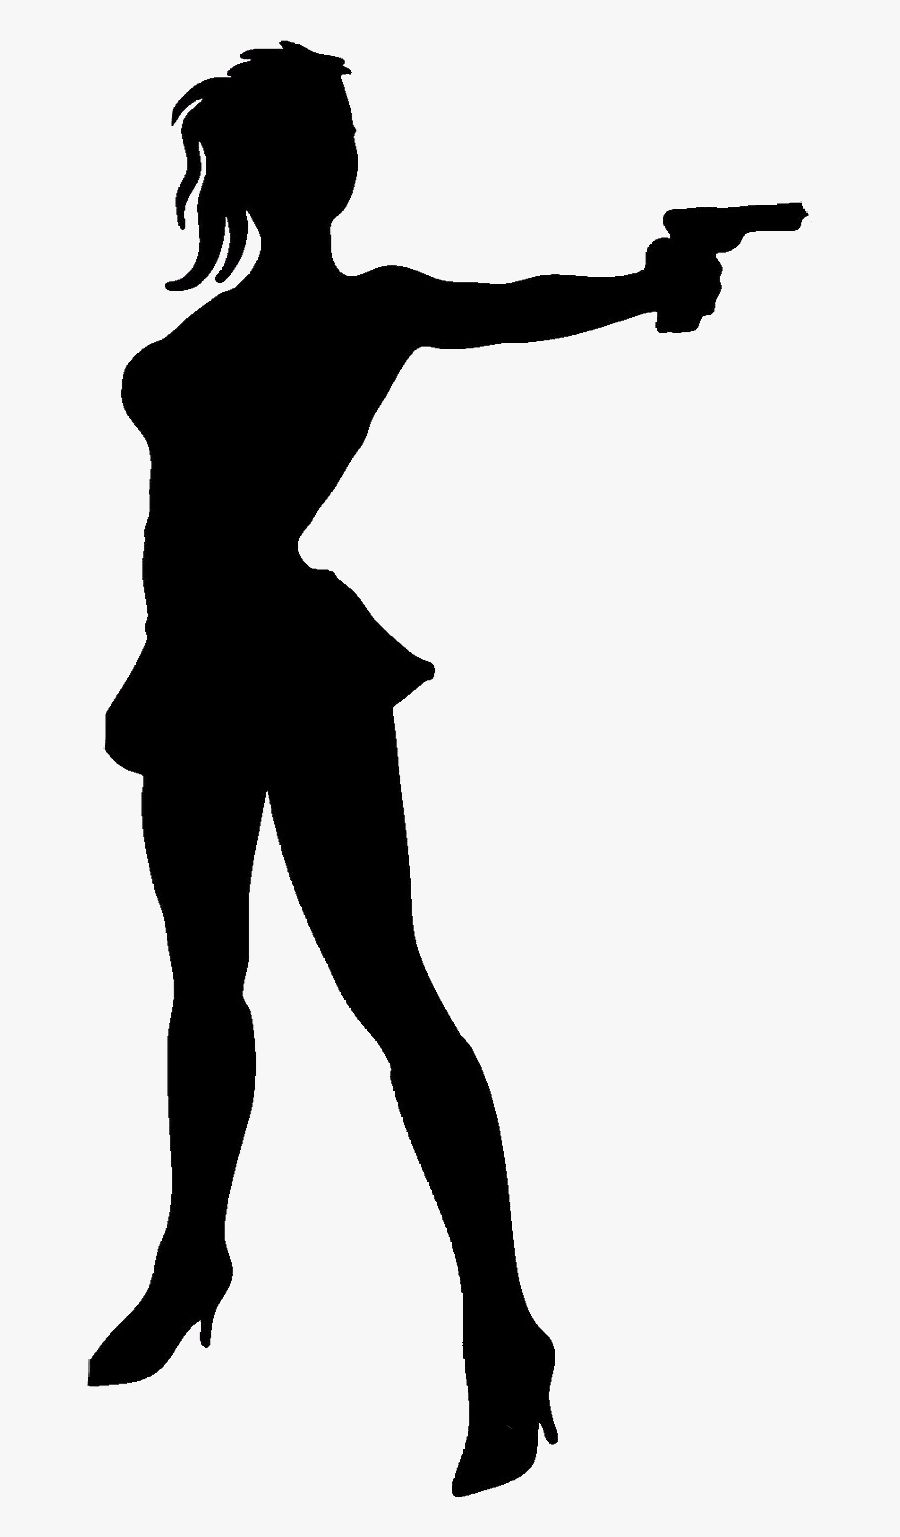 #woman #silhouette #pistol - Girl With Gun Silhouette Png, Transparent Clipart